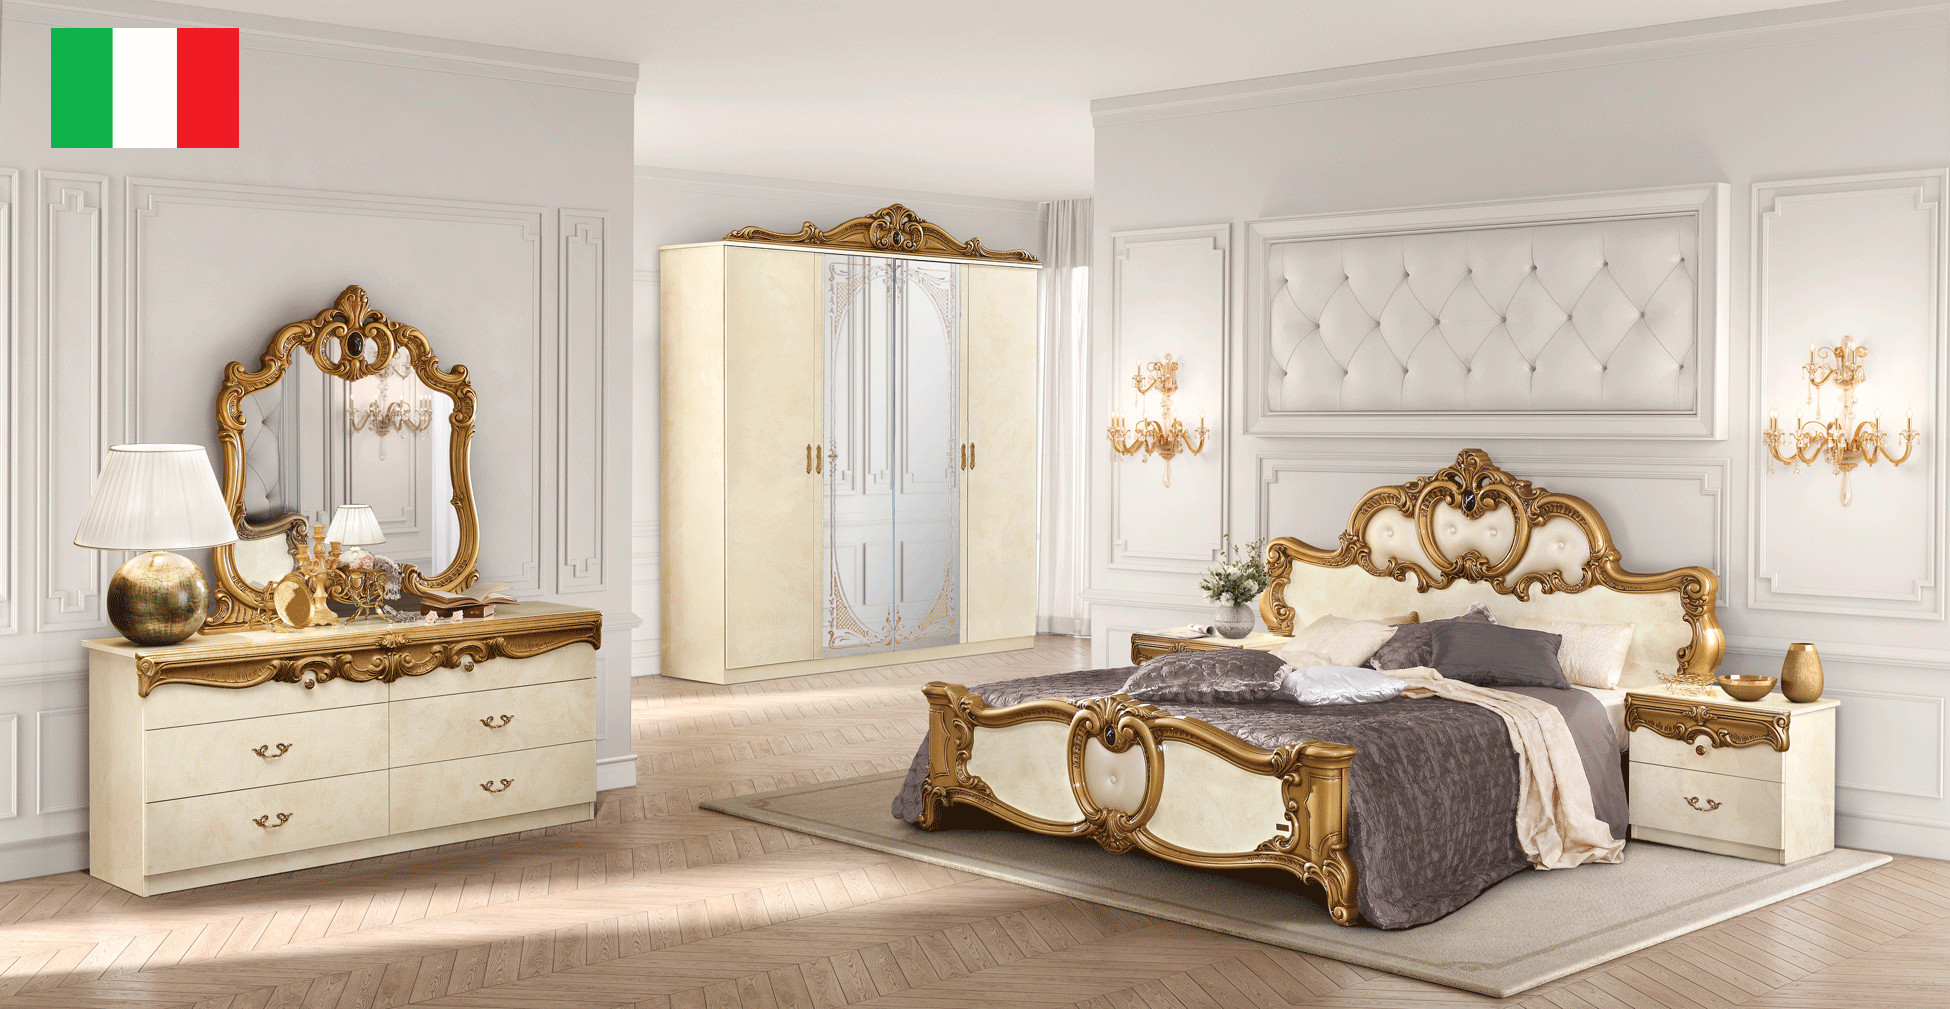 Bedroom Furniture Mirrors Barocco Ivory w/Gold Bedroom